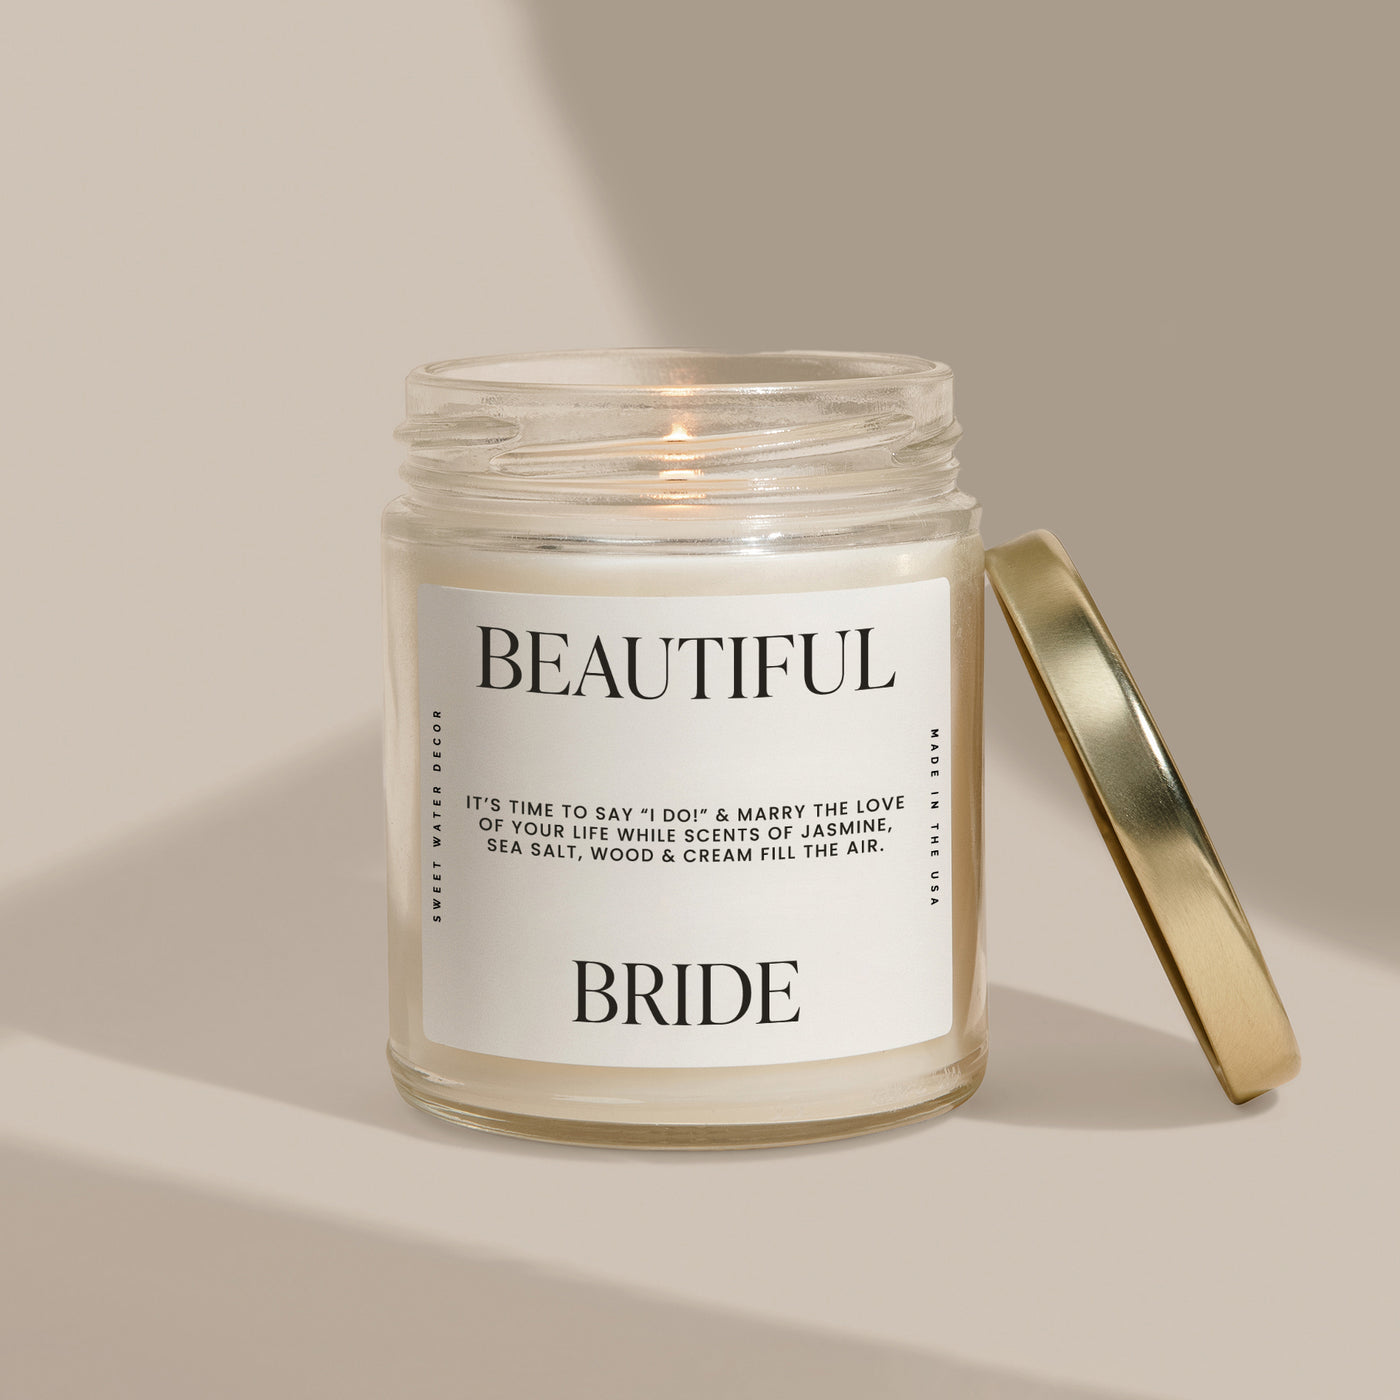 Beautiful Bride Soy Candle - Large Quote Label - 9 oz